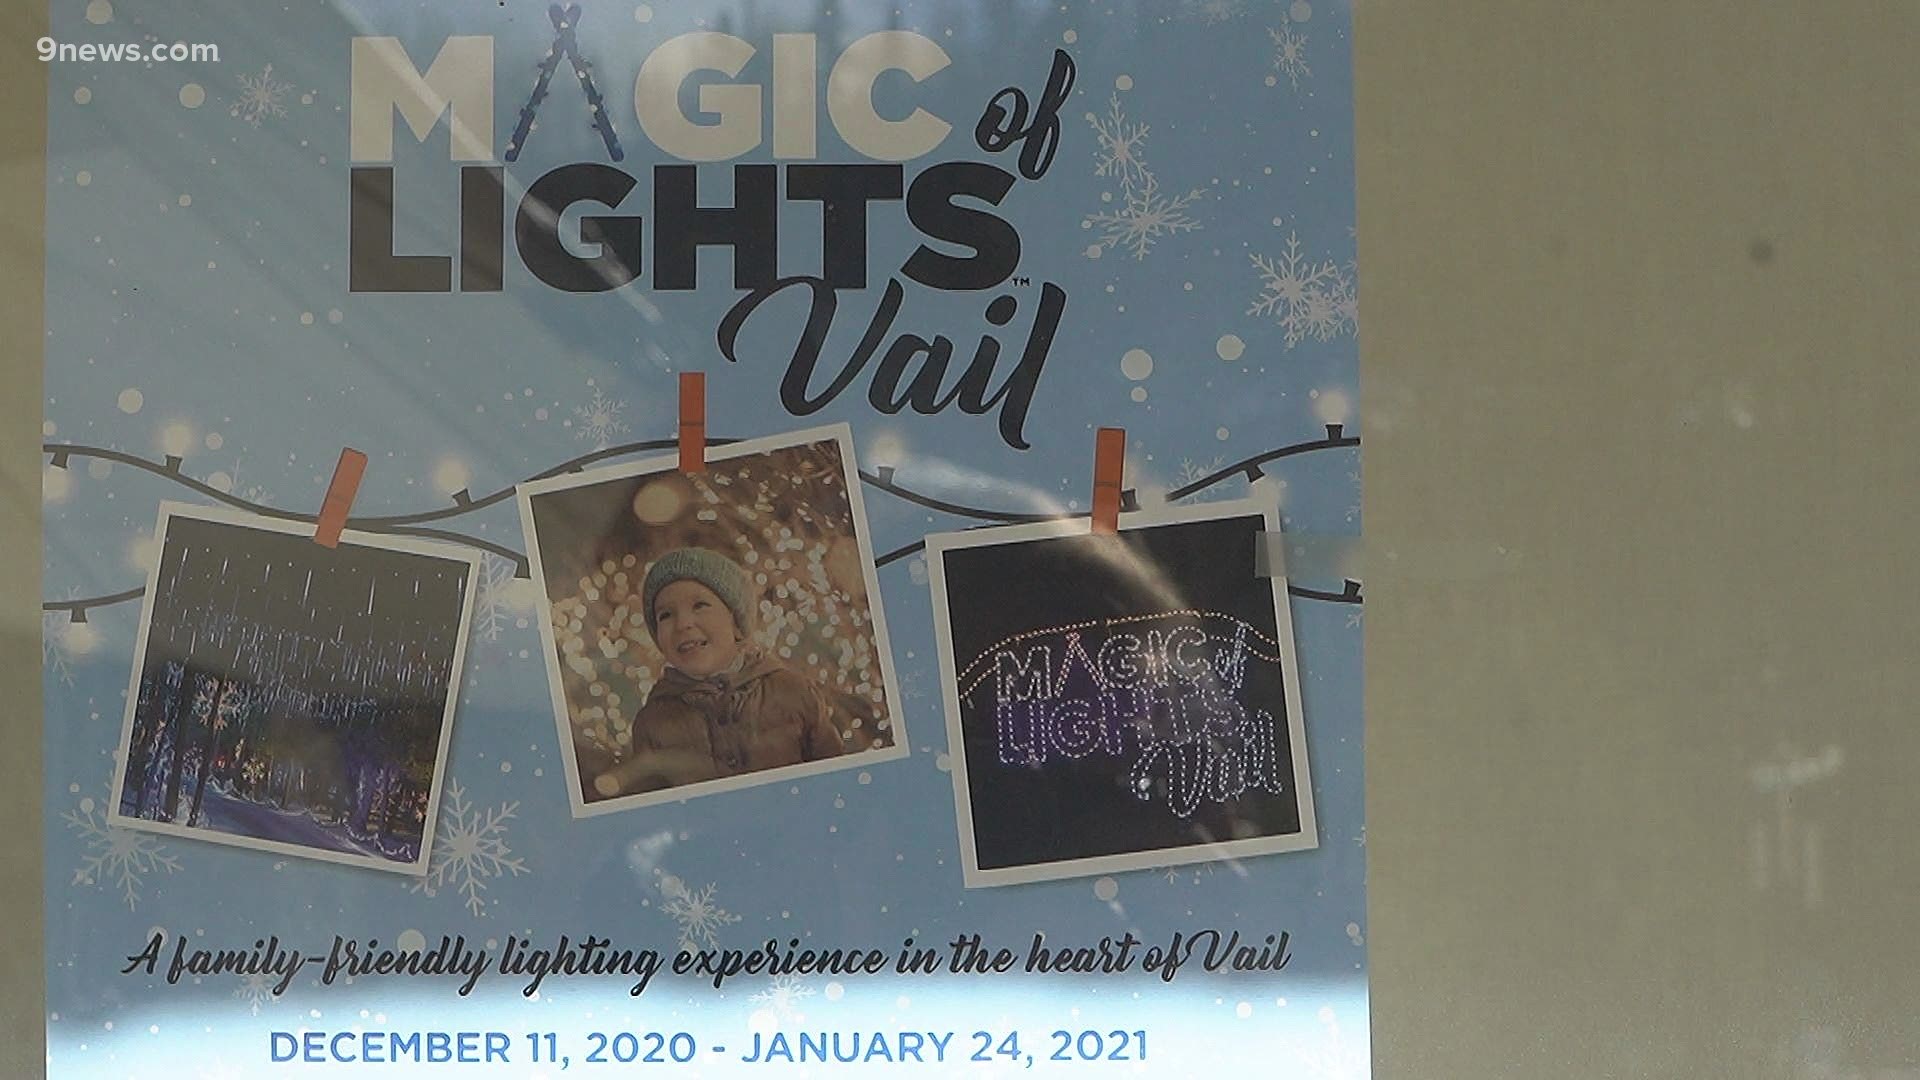 The Magic Lights of Vail is an outdoor exhibit that winds its way through a half-mile of the Betty Ford Gardens and part of Ford Park.